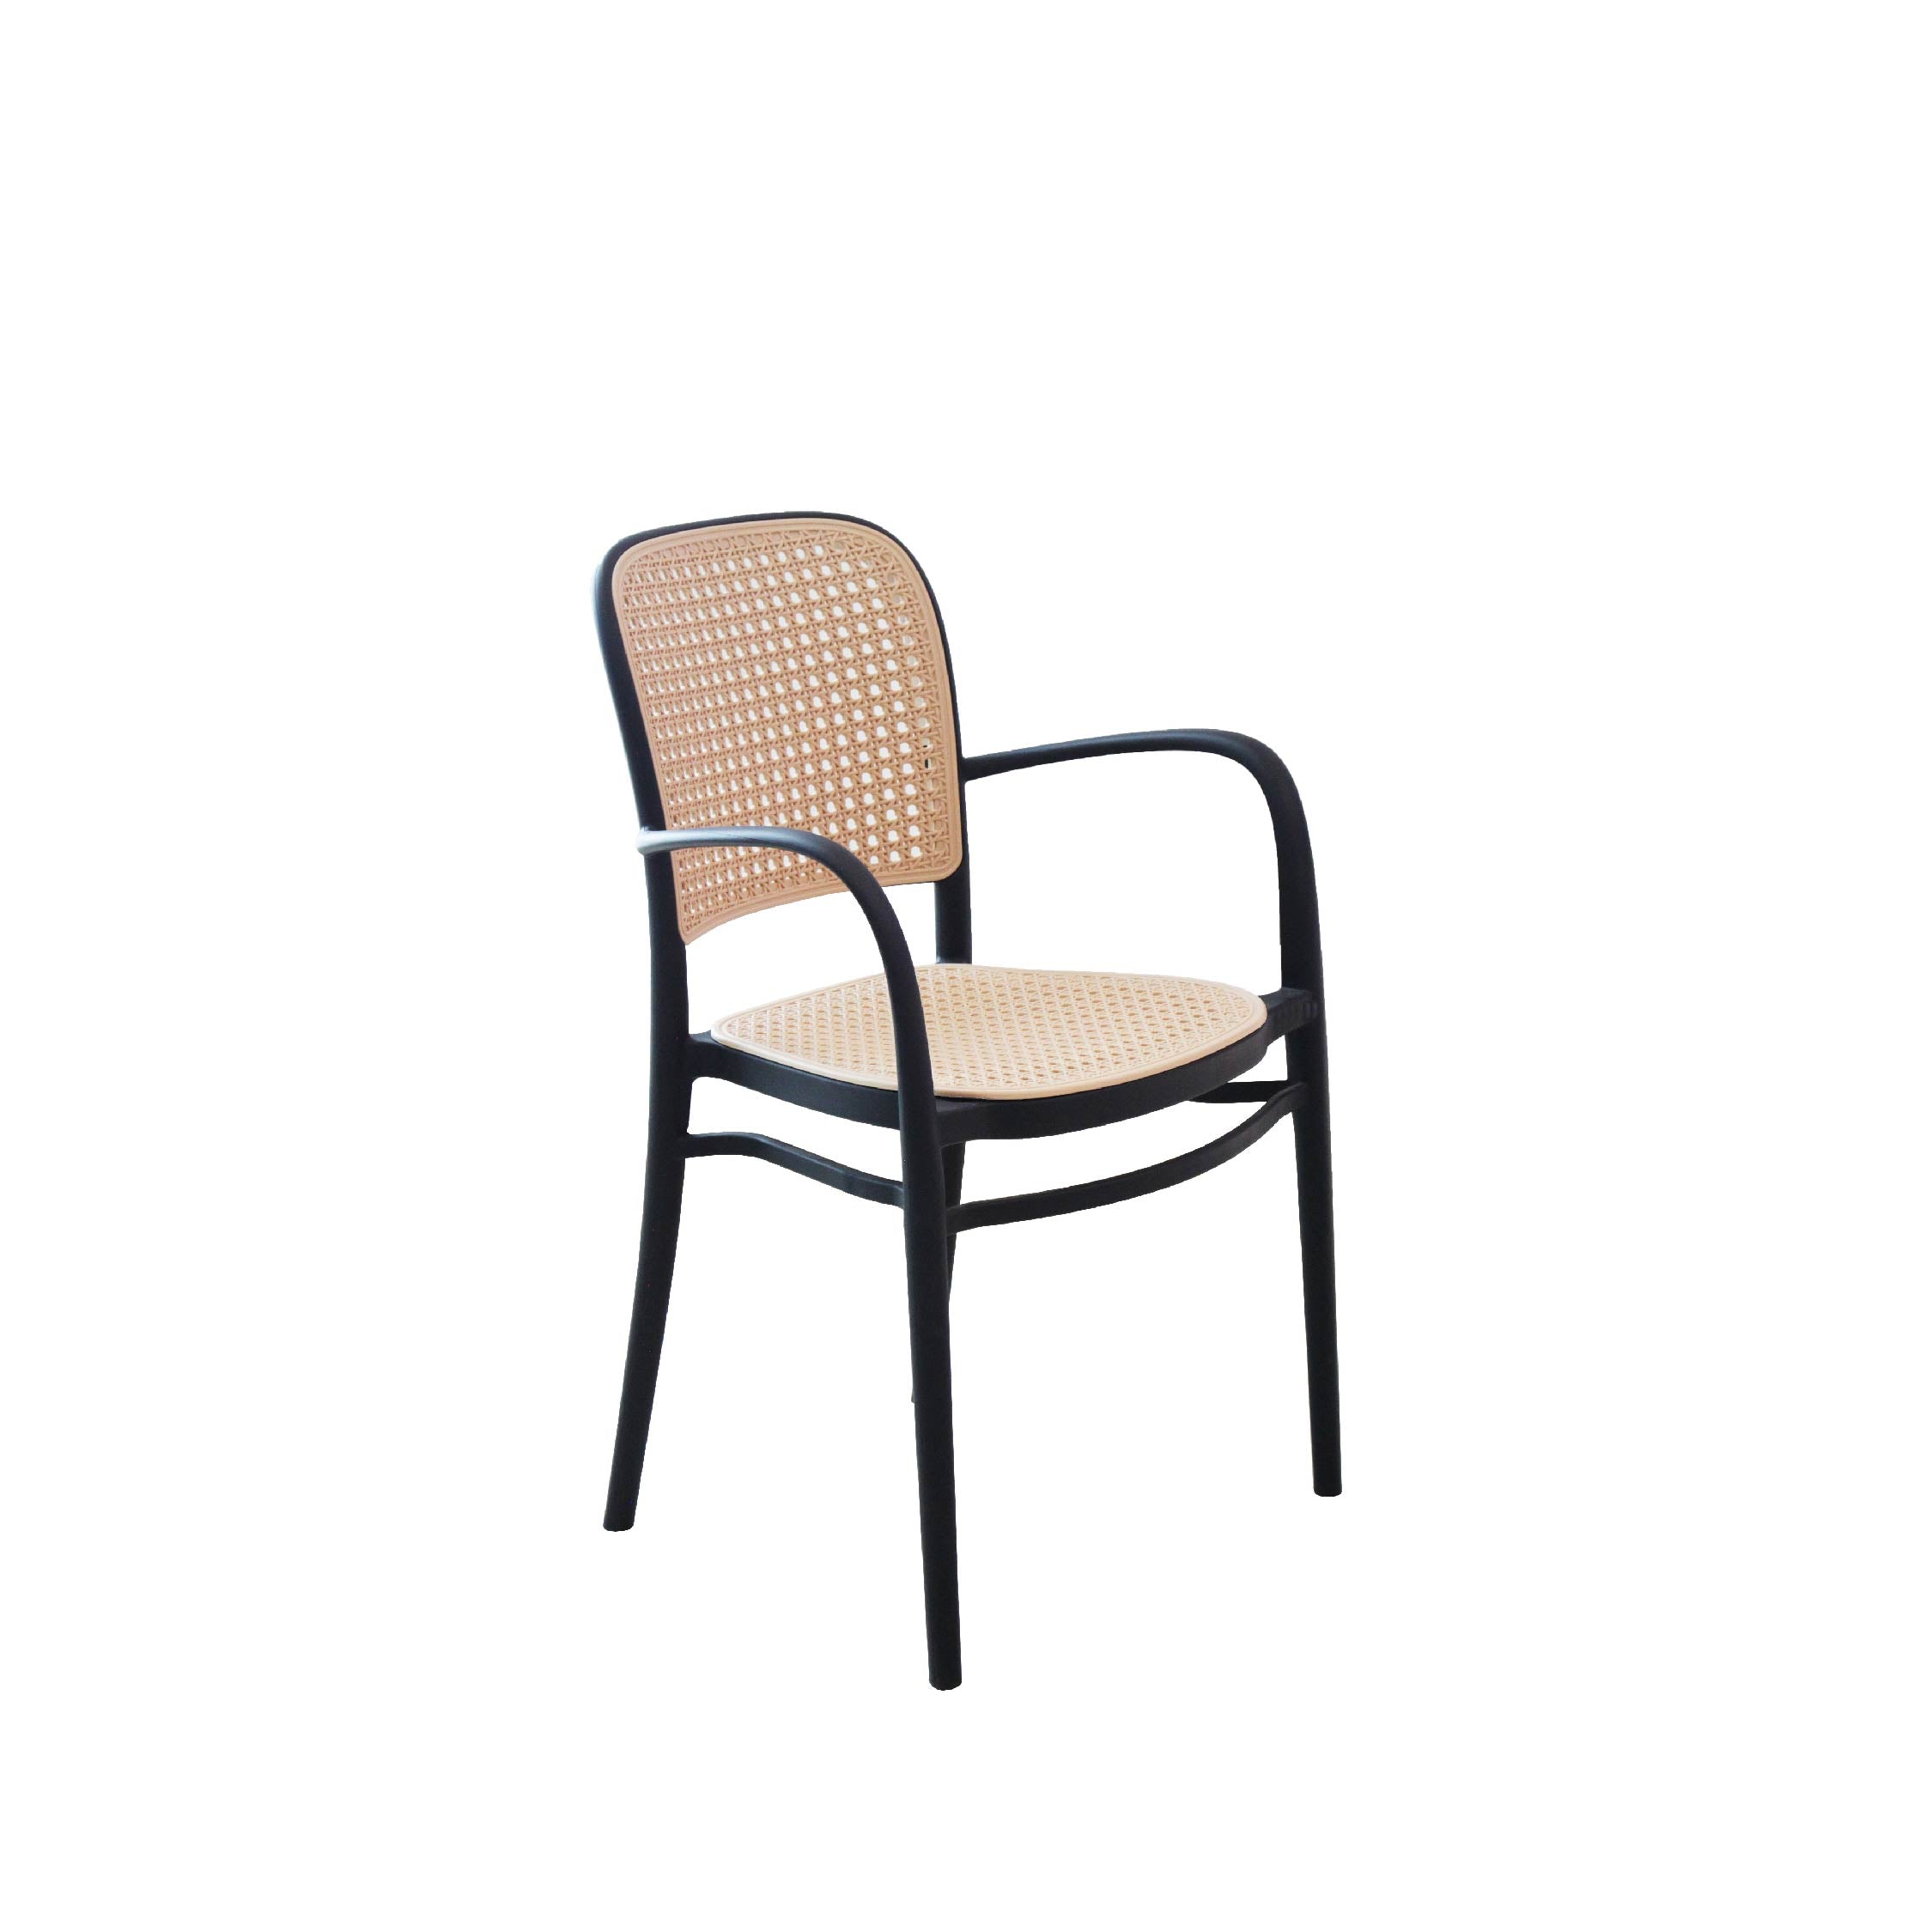 PATI Chair 174 with Arm